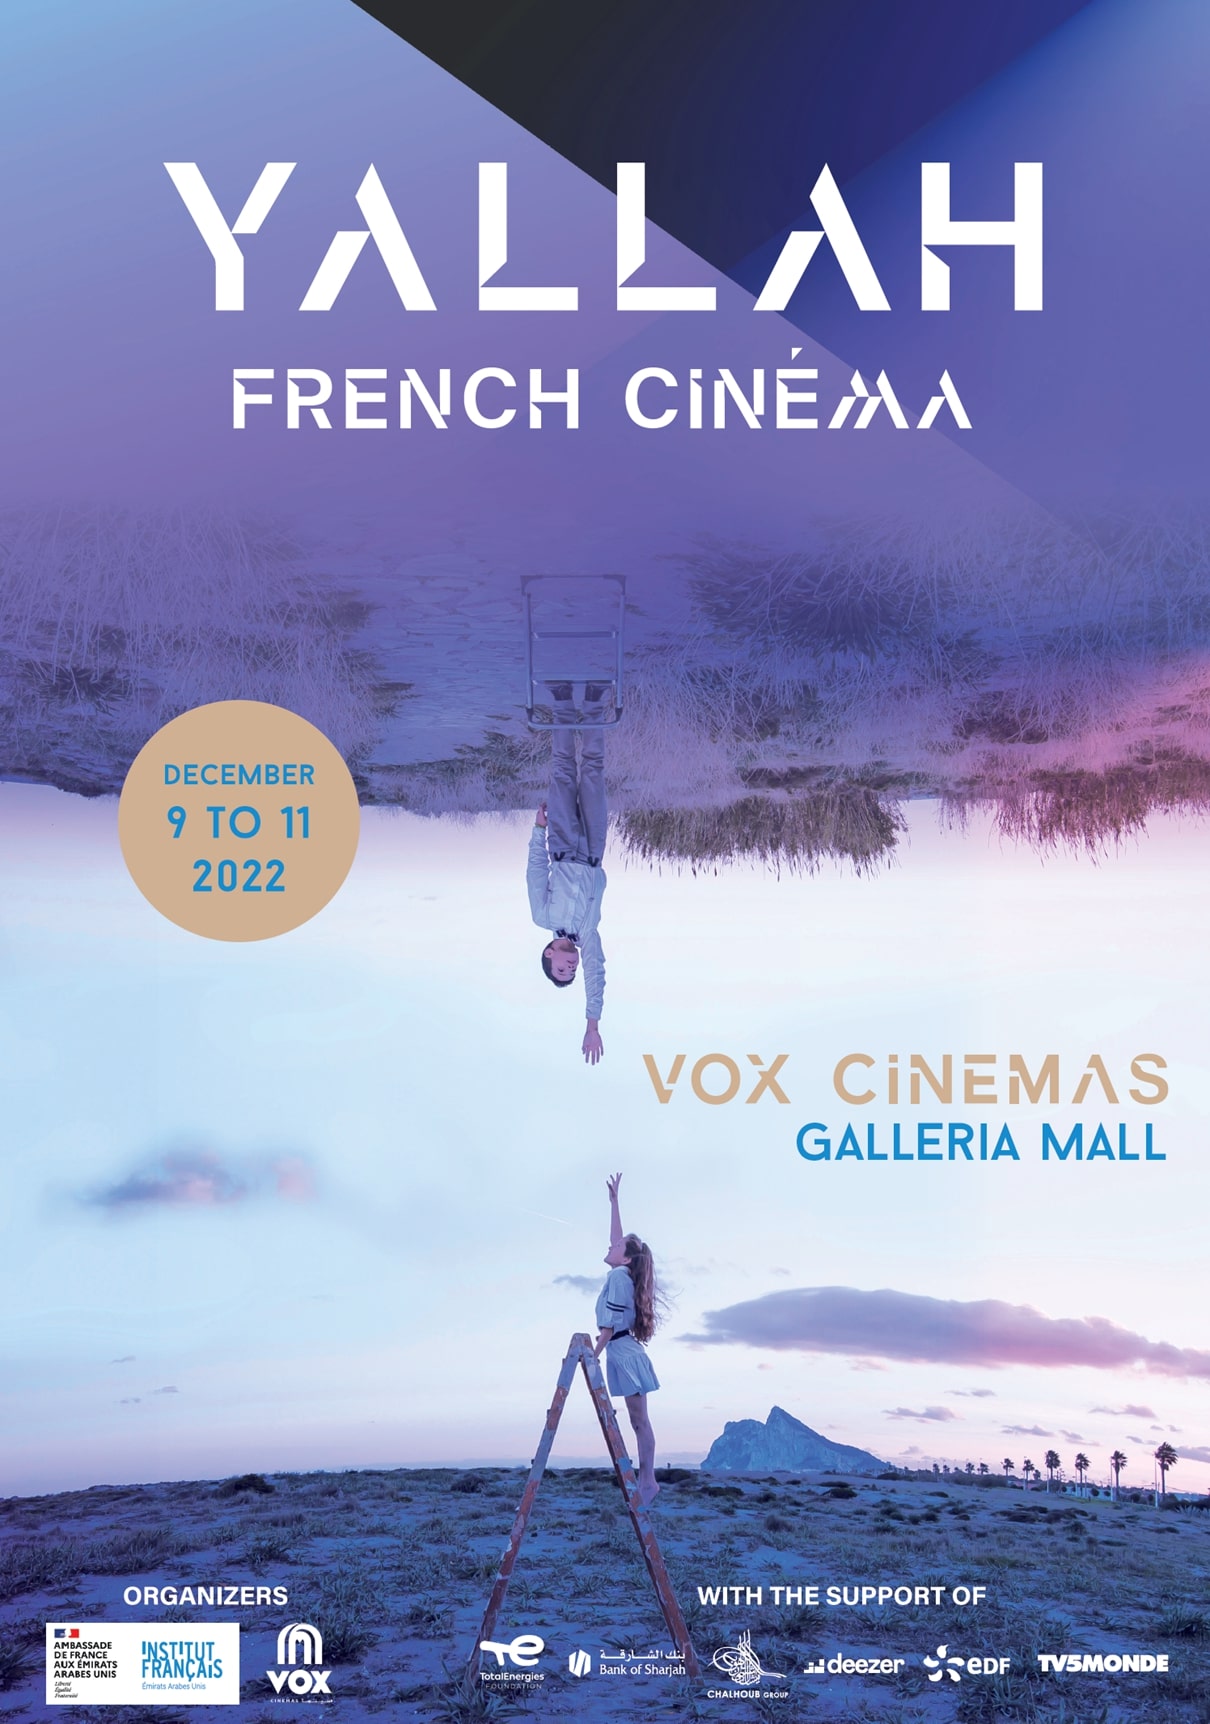 UAE’s Institut Français And Vox Cinemas Announced The Launch Of The First French Cinema Festival